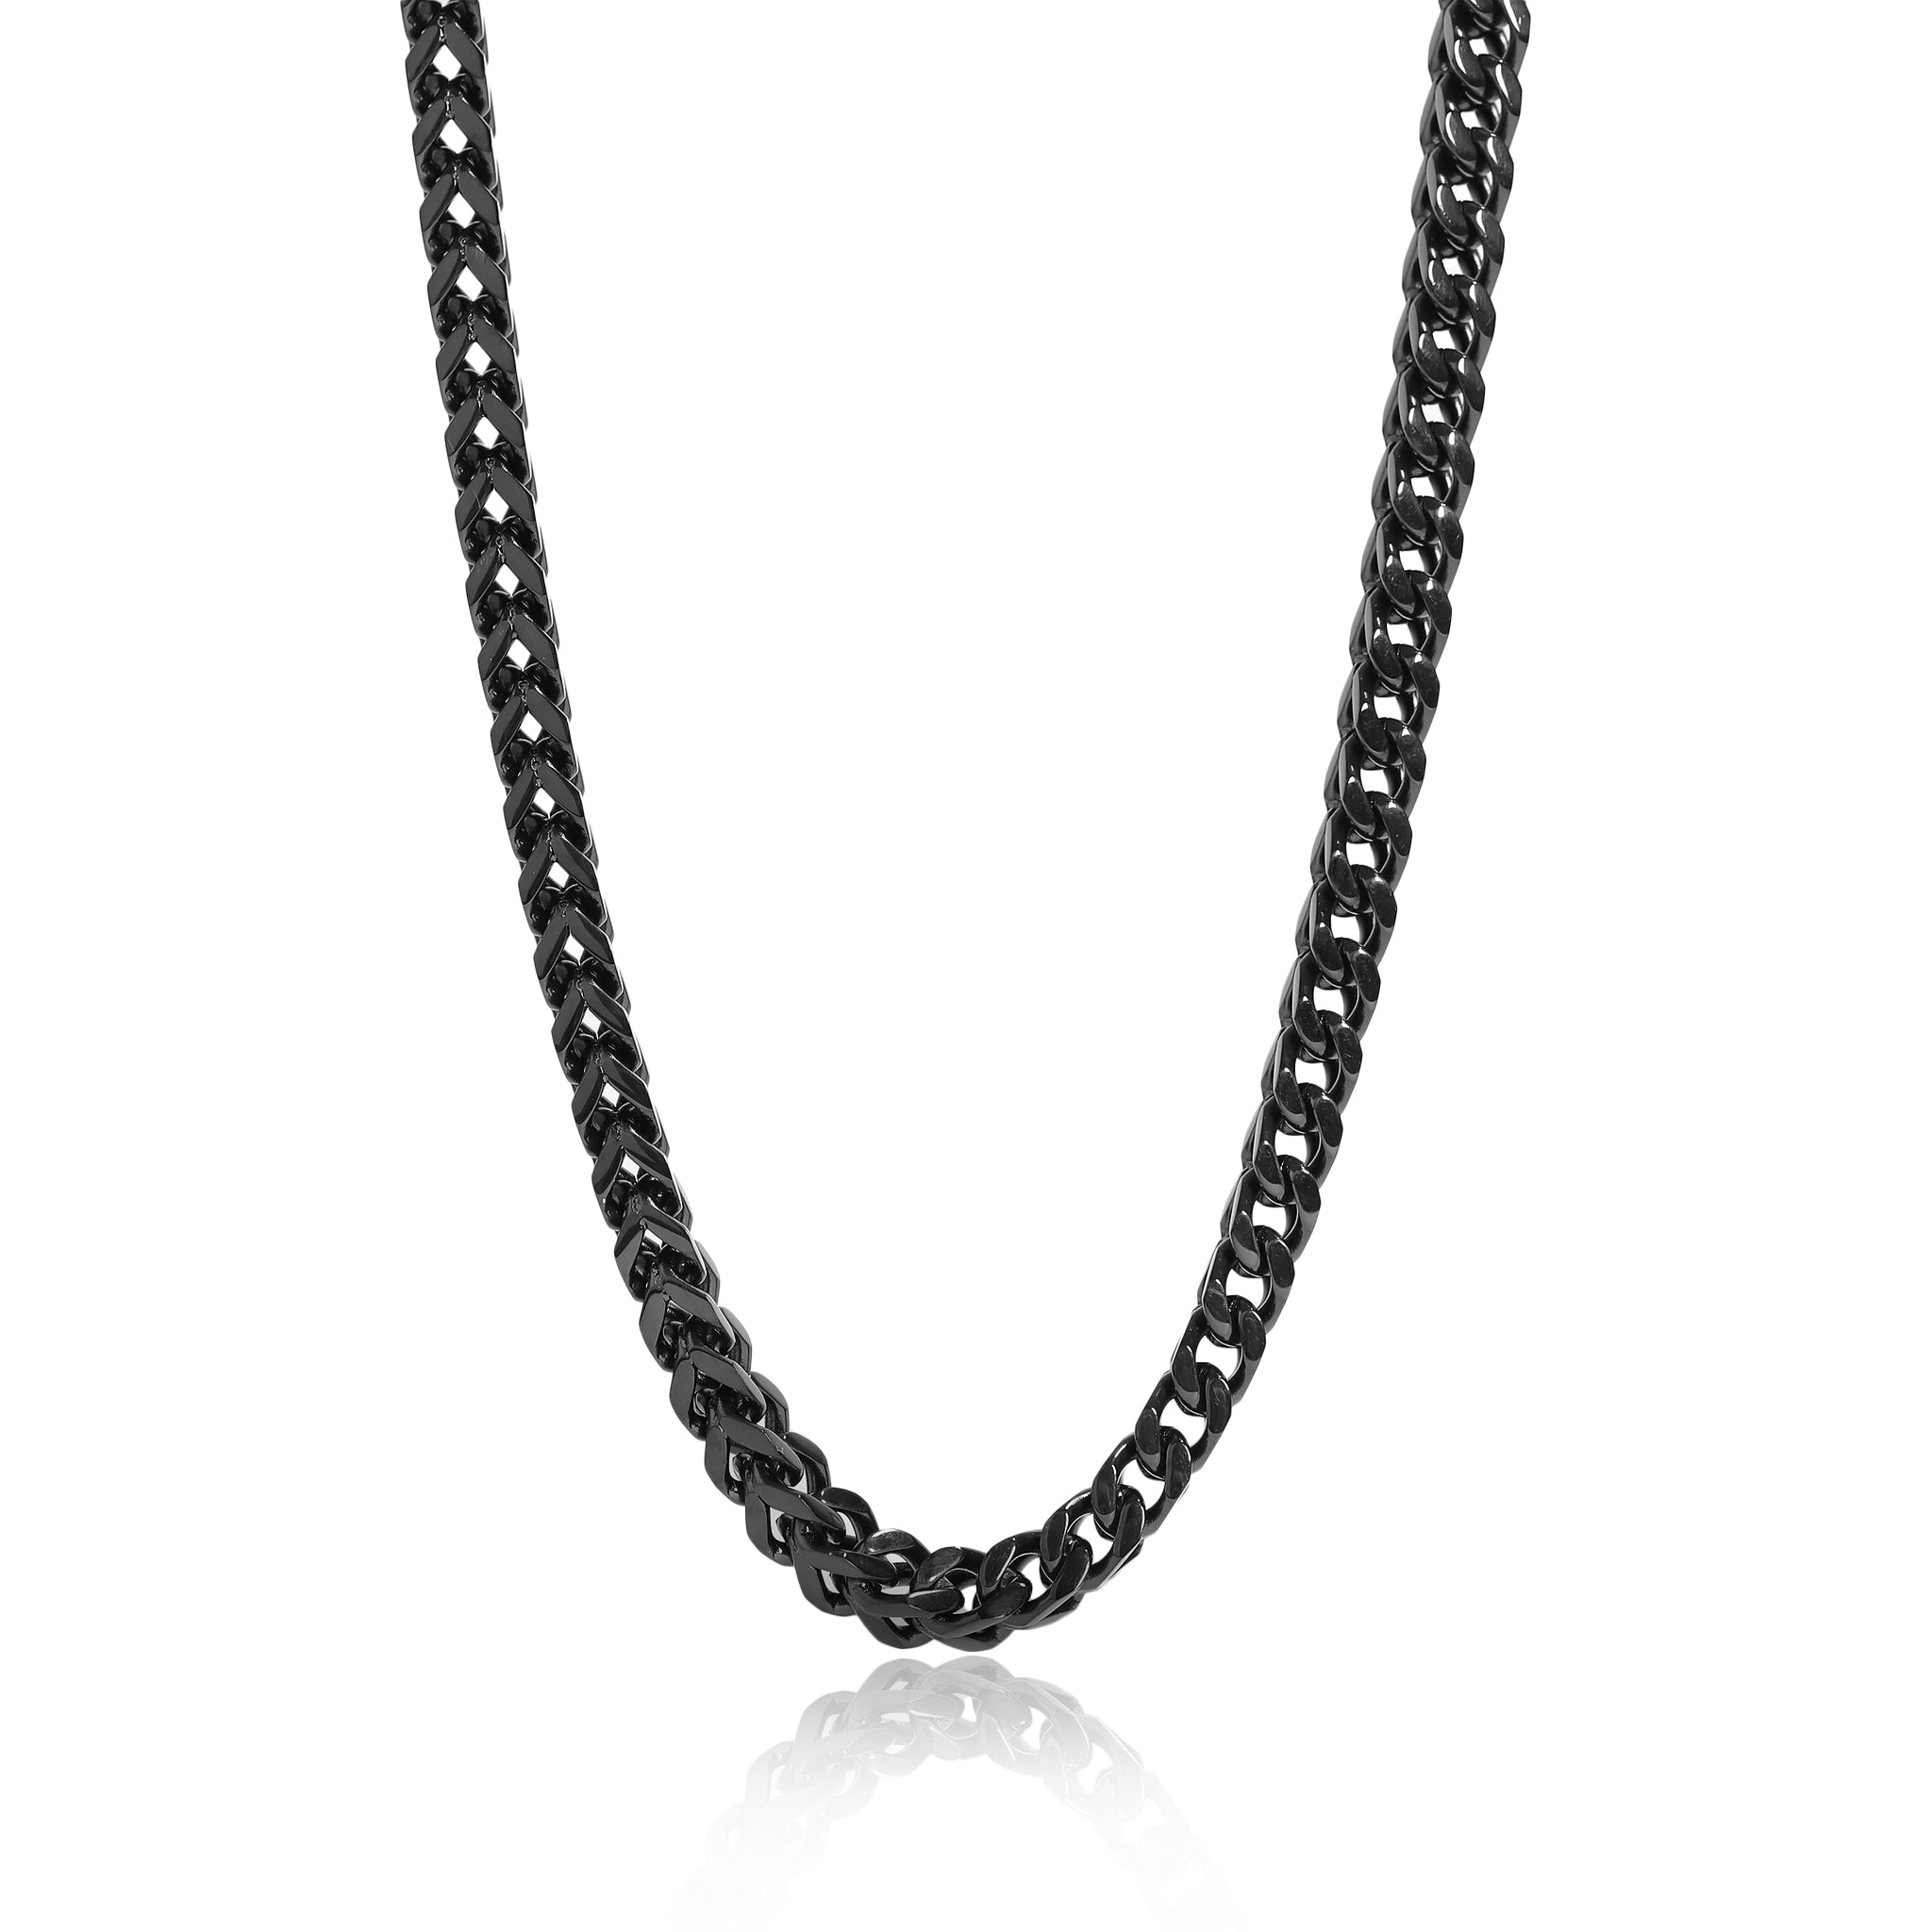 FOCALOOK Wheat Chain Necklace 3mm- Stainless Steel Black Rope Jewelry for  Men & Women 18-30 Inch